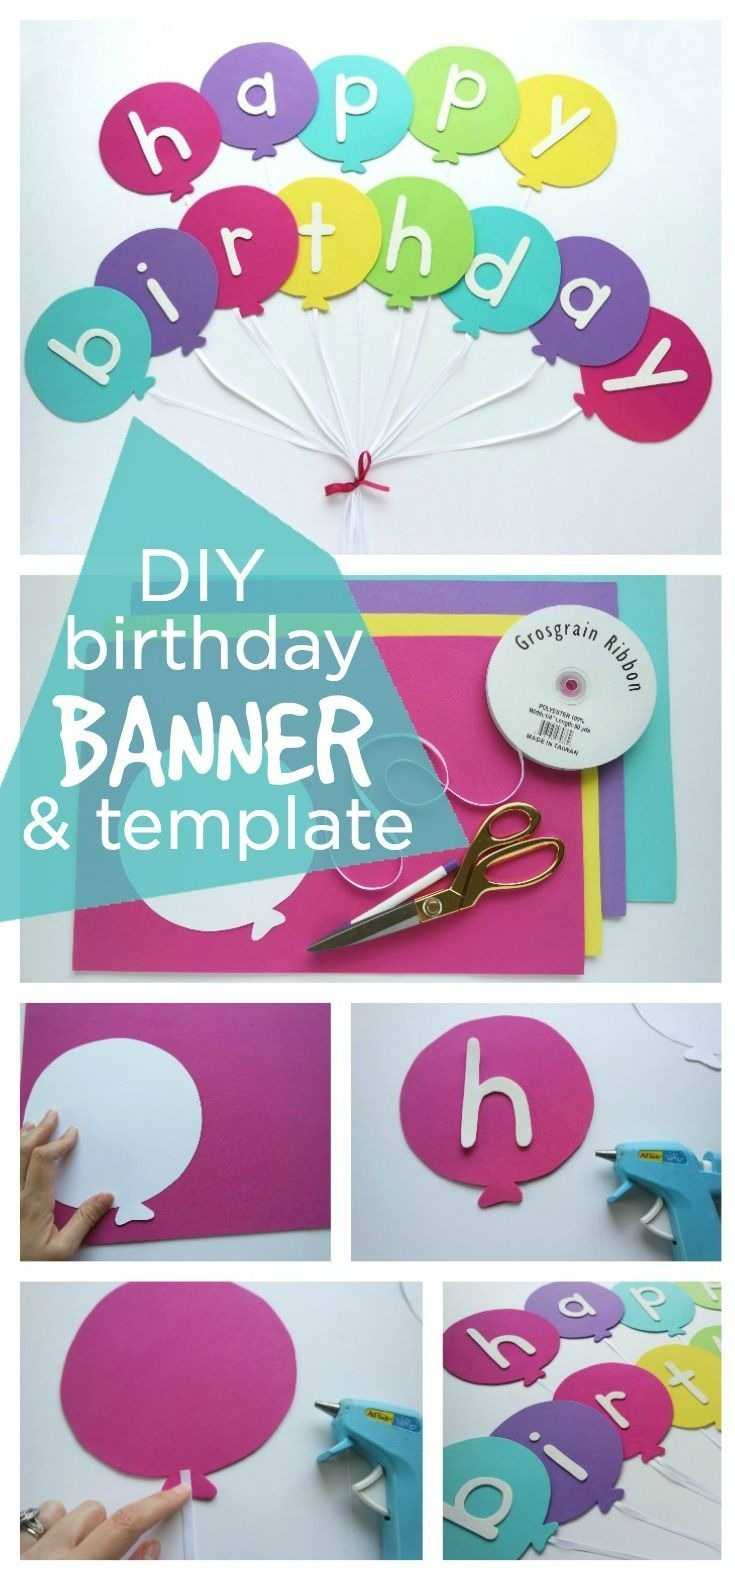 Happy Birthday Banner Diy Template – Birthday Decor Intended For Diy Party Banner Template